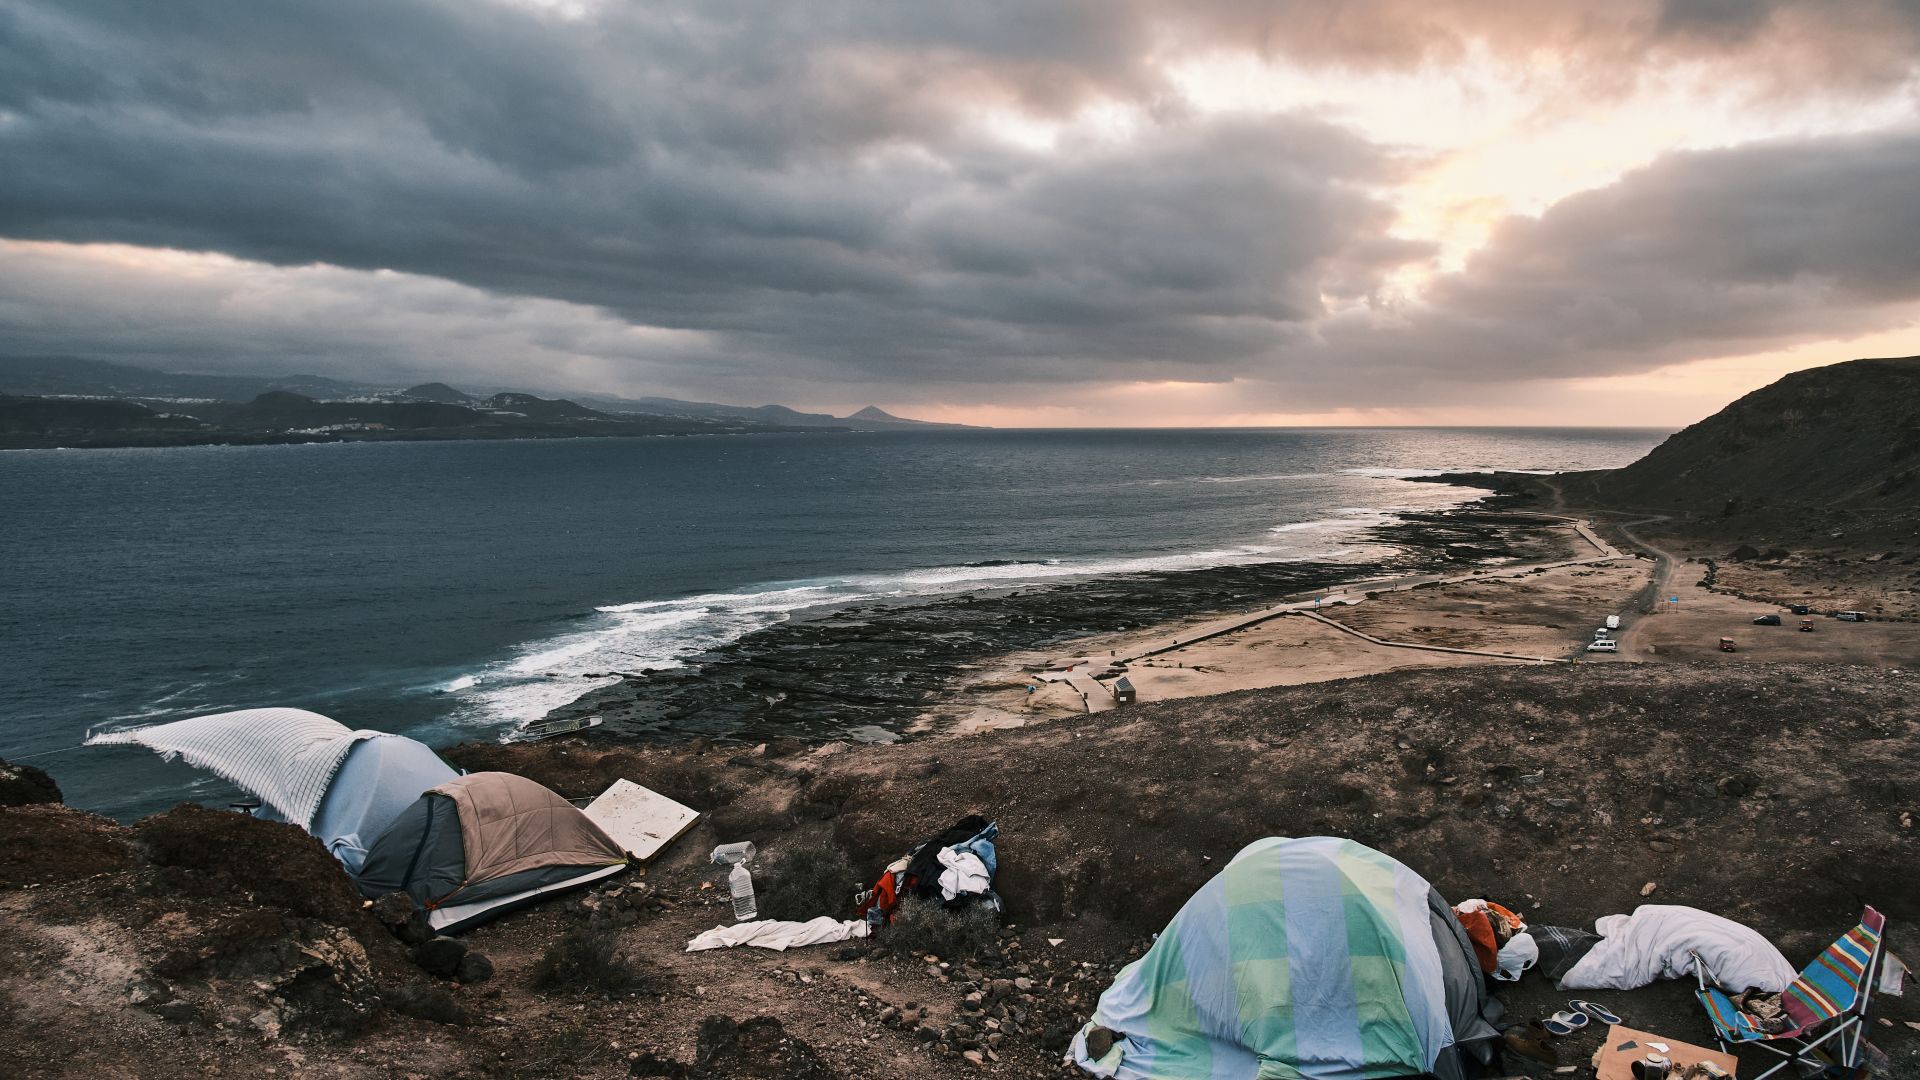 A photo of a makeshift shelter by the sea.